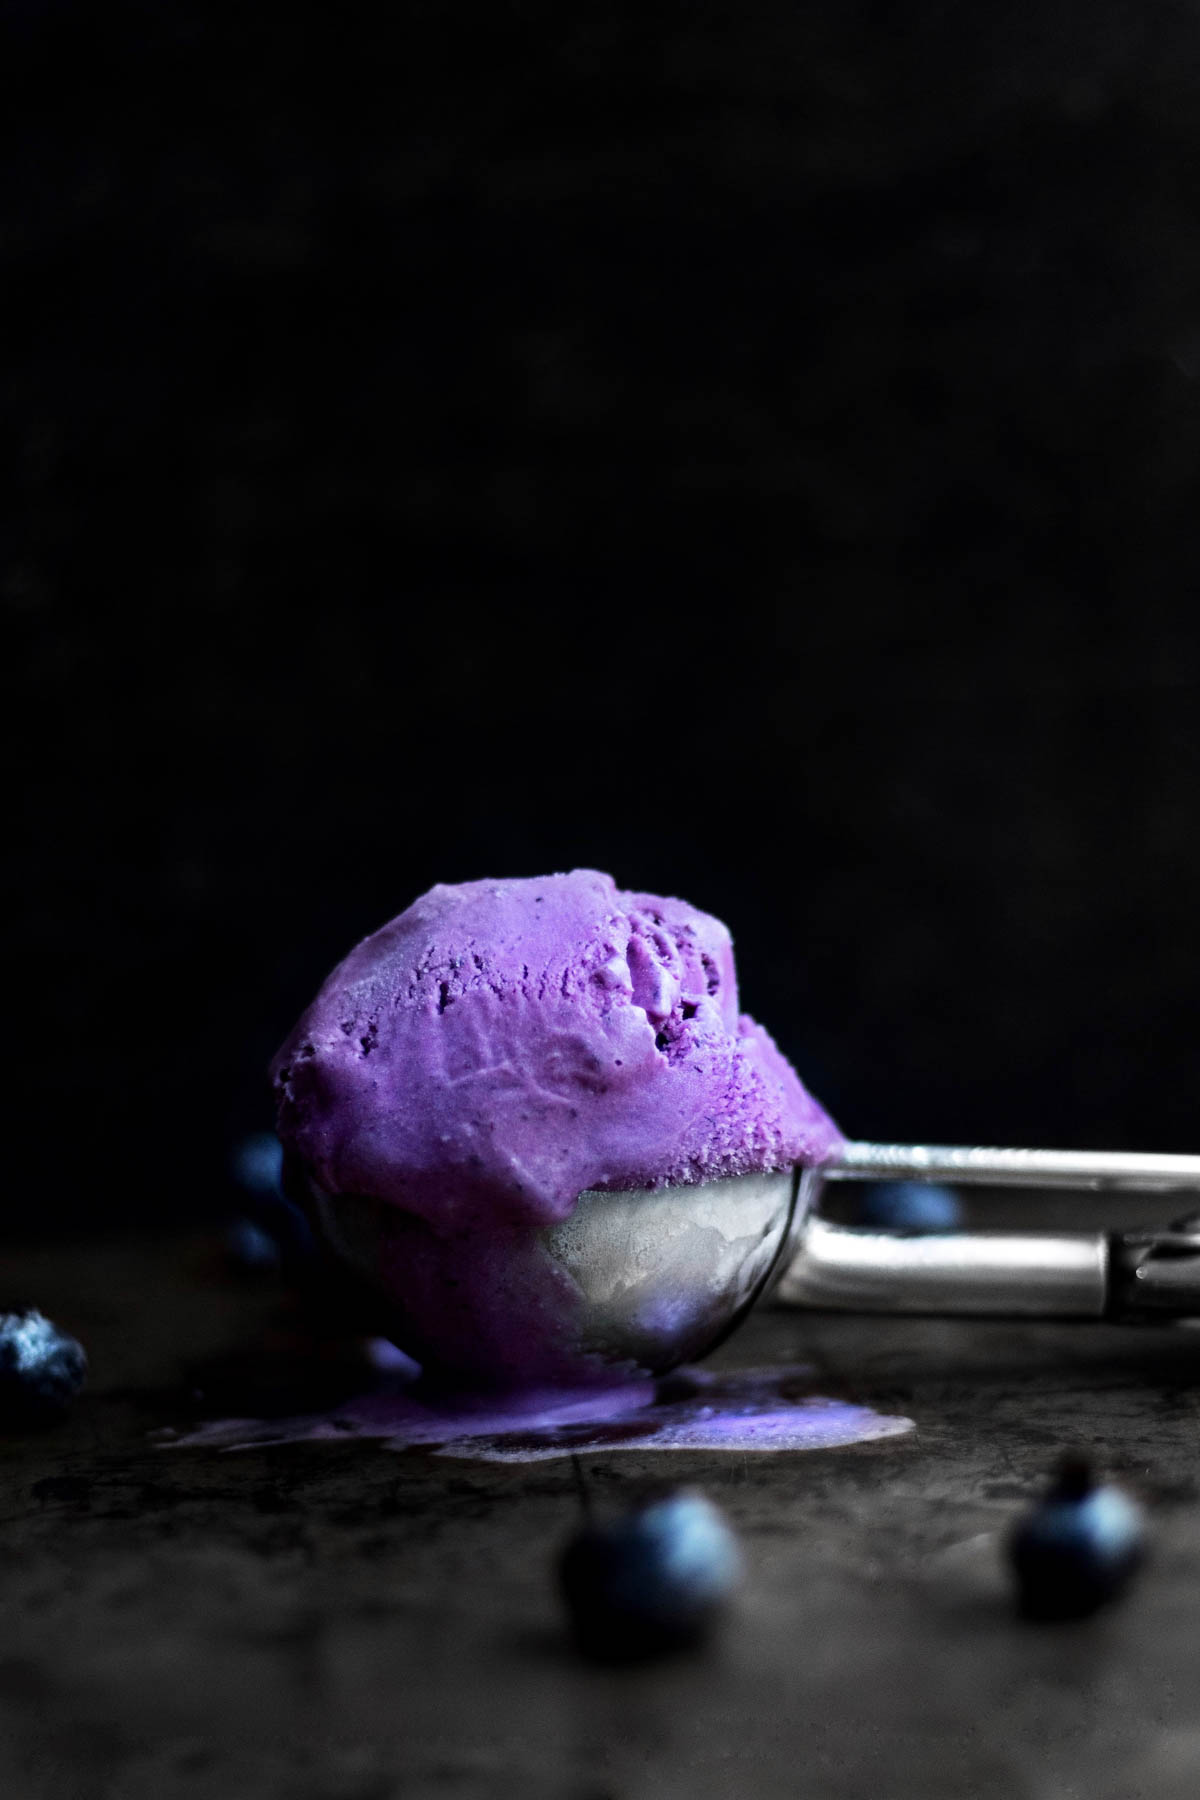 A scoop of purple Blueberry Ice Cream sits in a scoop.